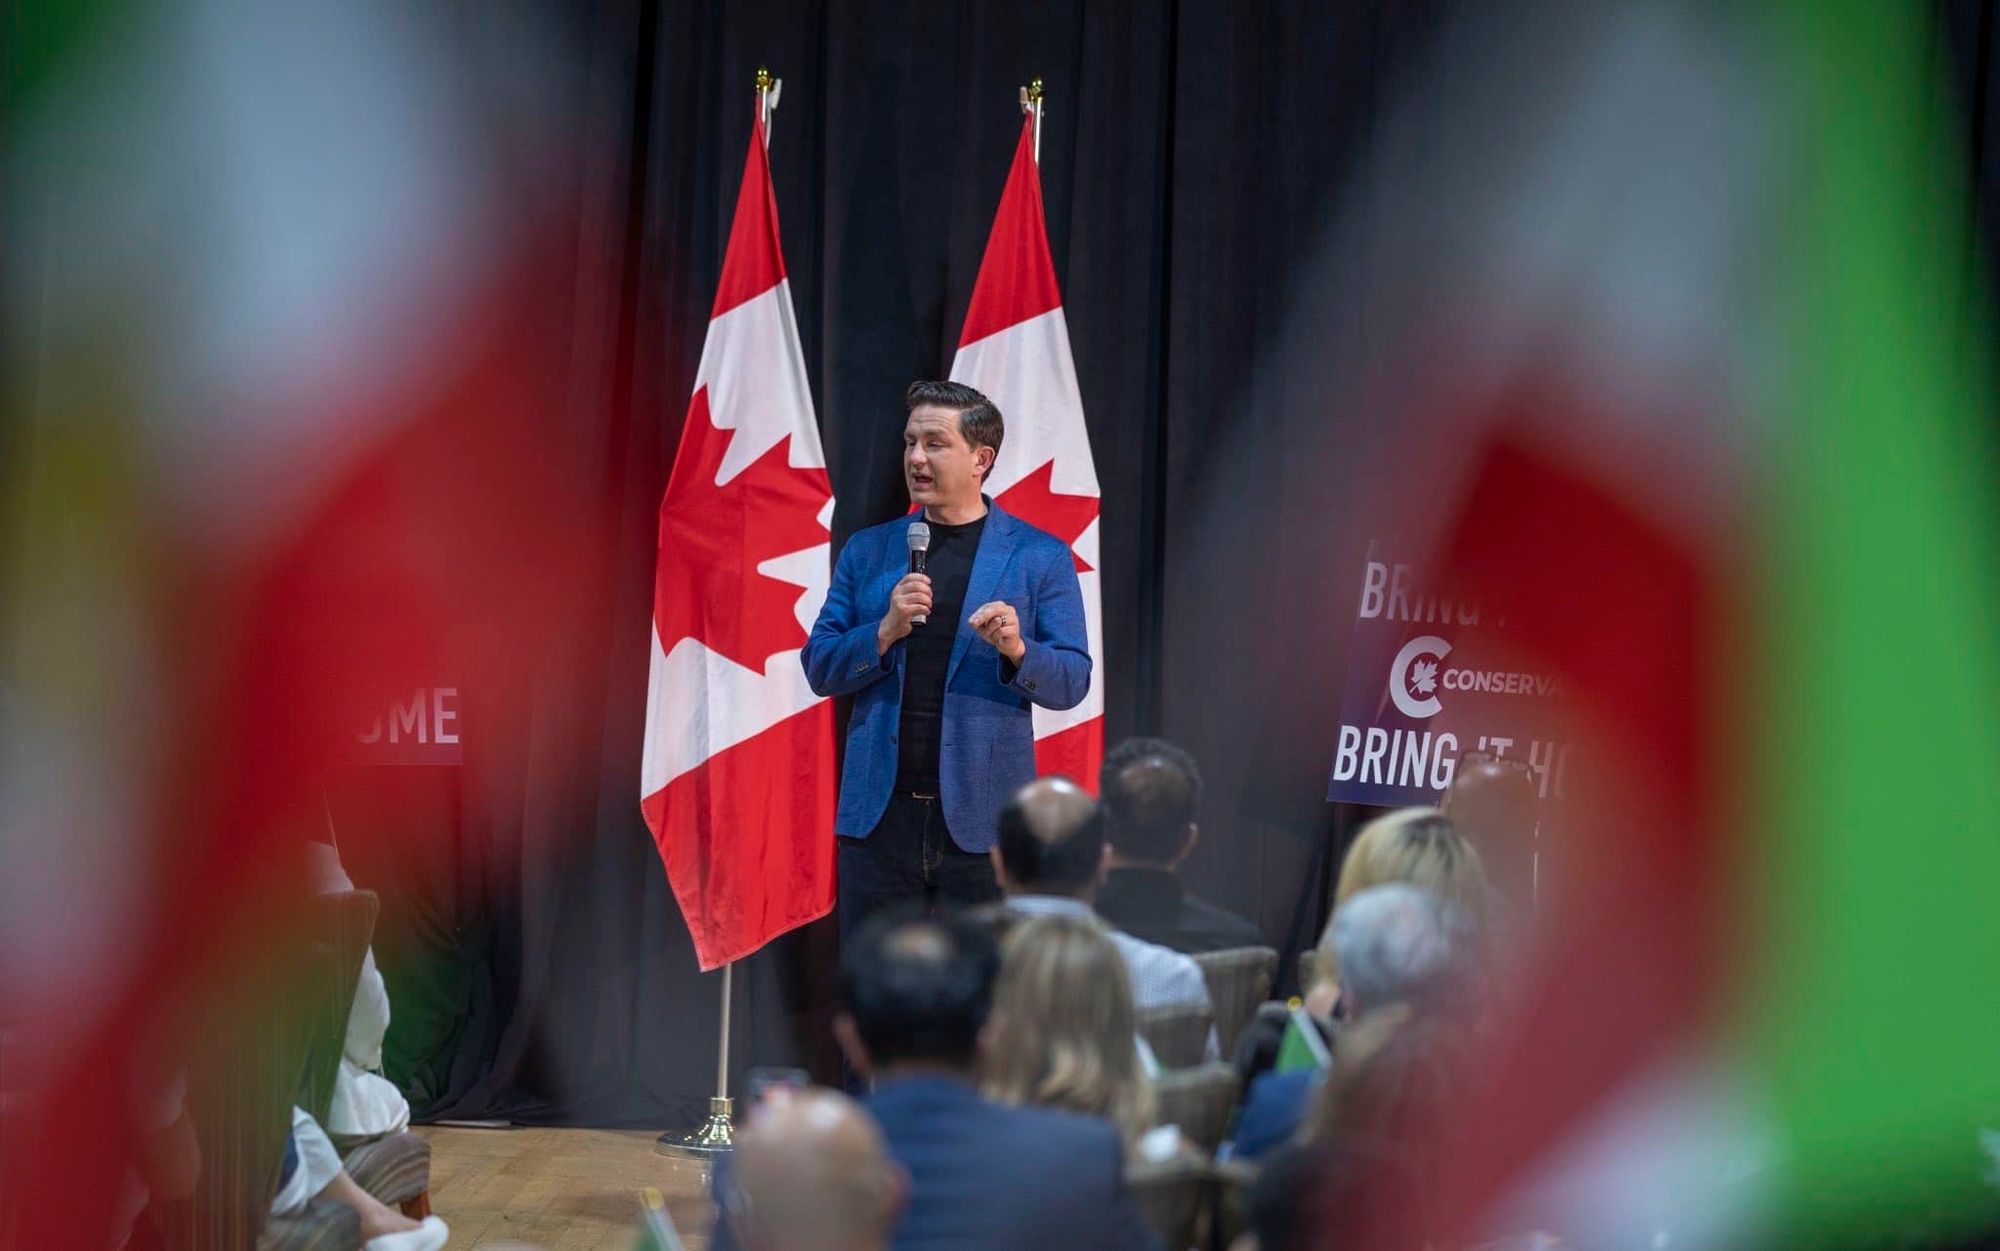 Conservative Delegates Energized By Poilievre, Claim ‘Mainstream Press’ Coverage Is Unfair